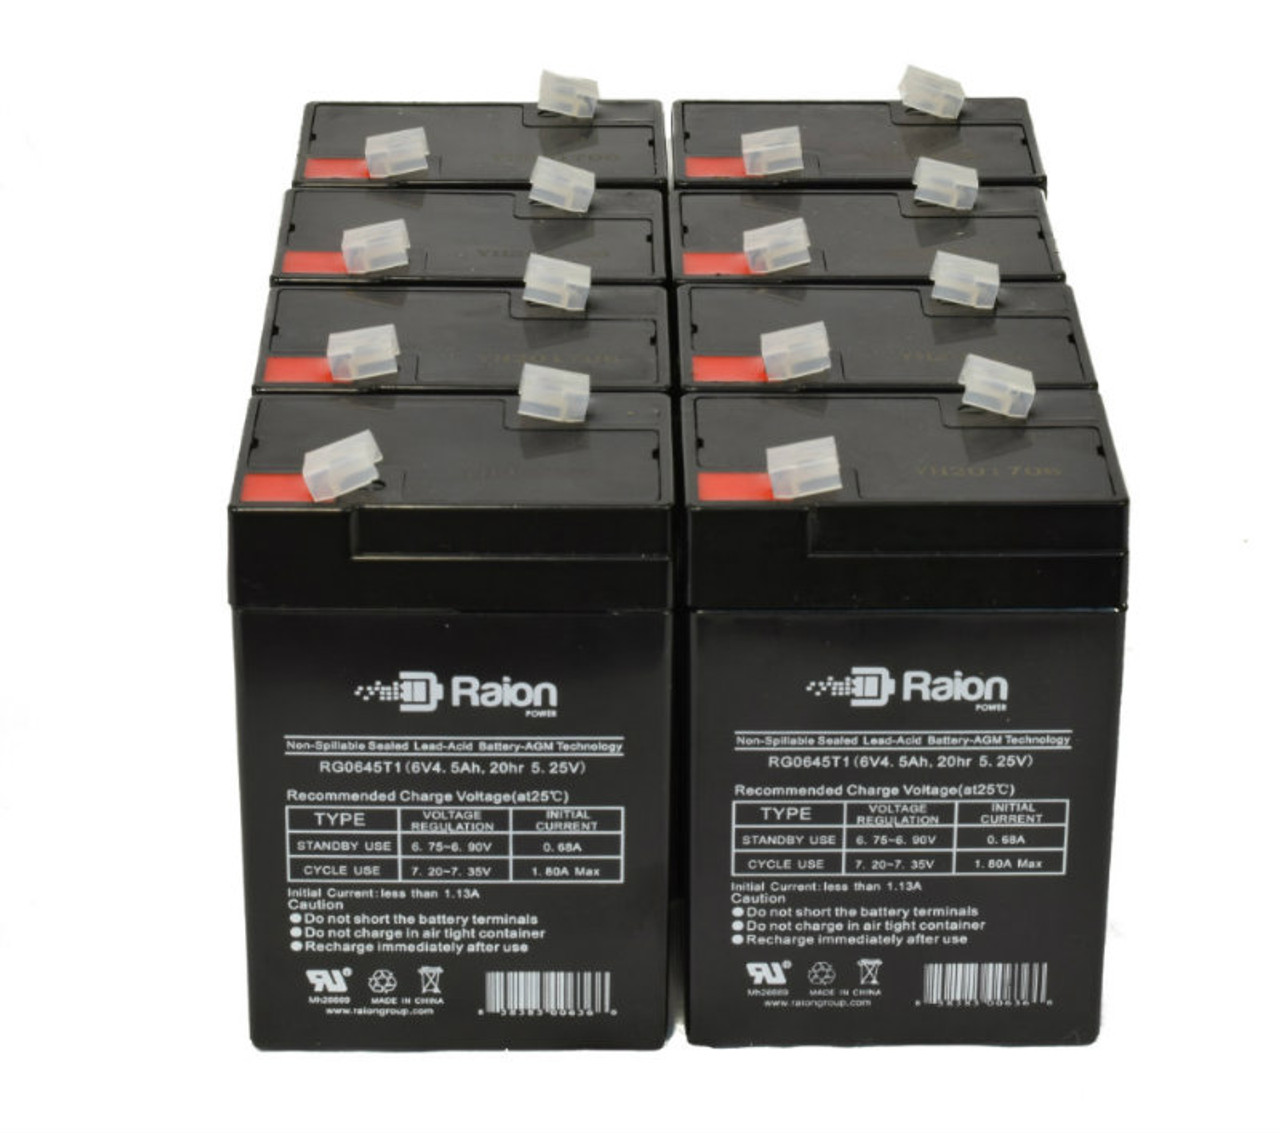 Raion Power 6 Volt 4.5Ah RG0645T1 Replacement Battery for National Power LS016M4 - 8 Pack